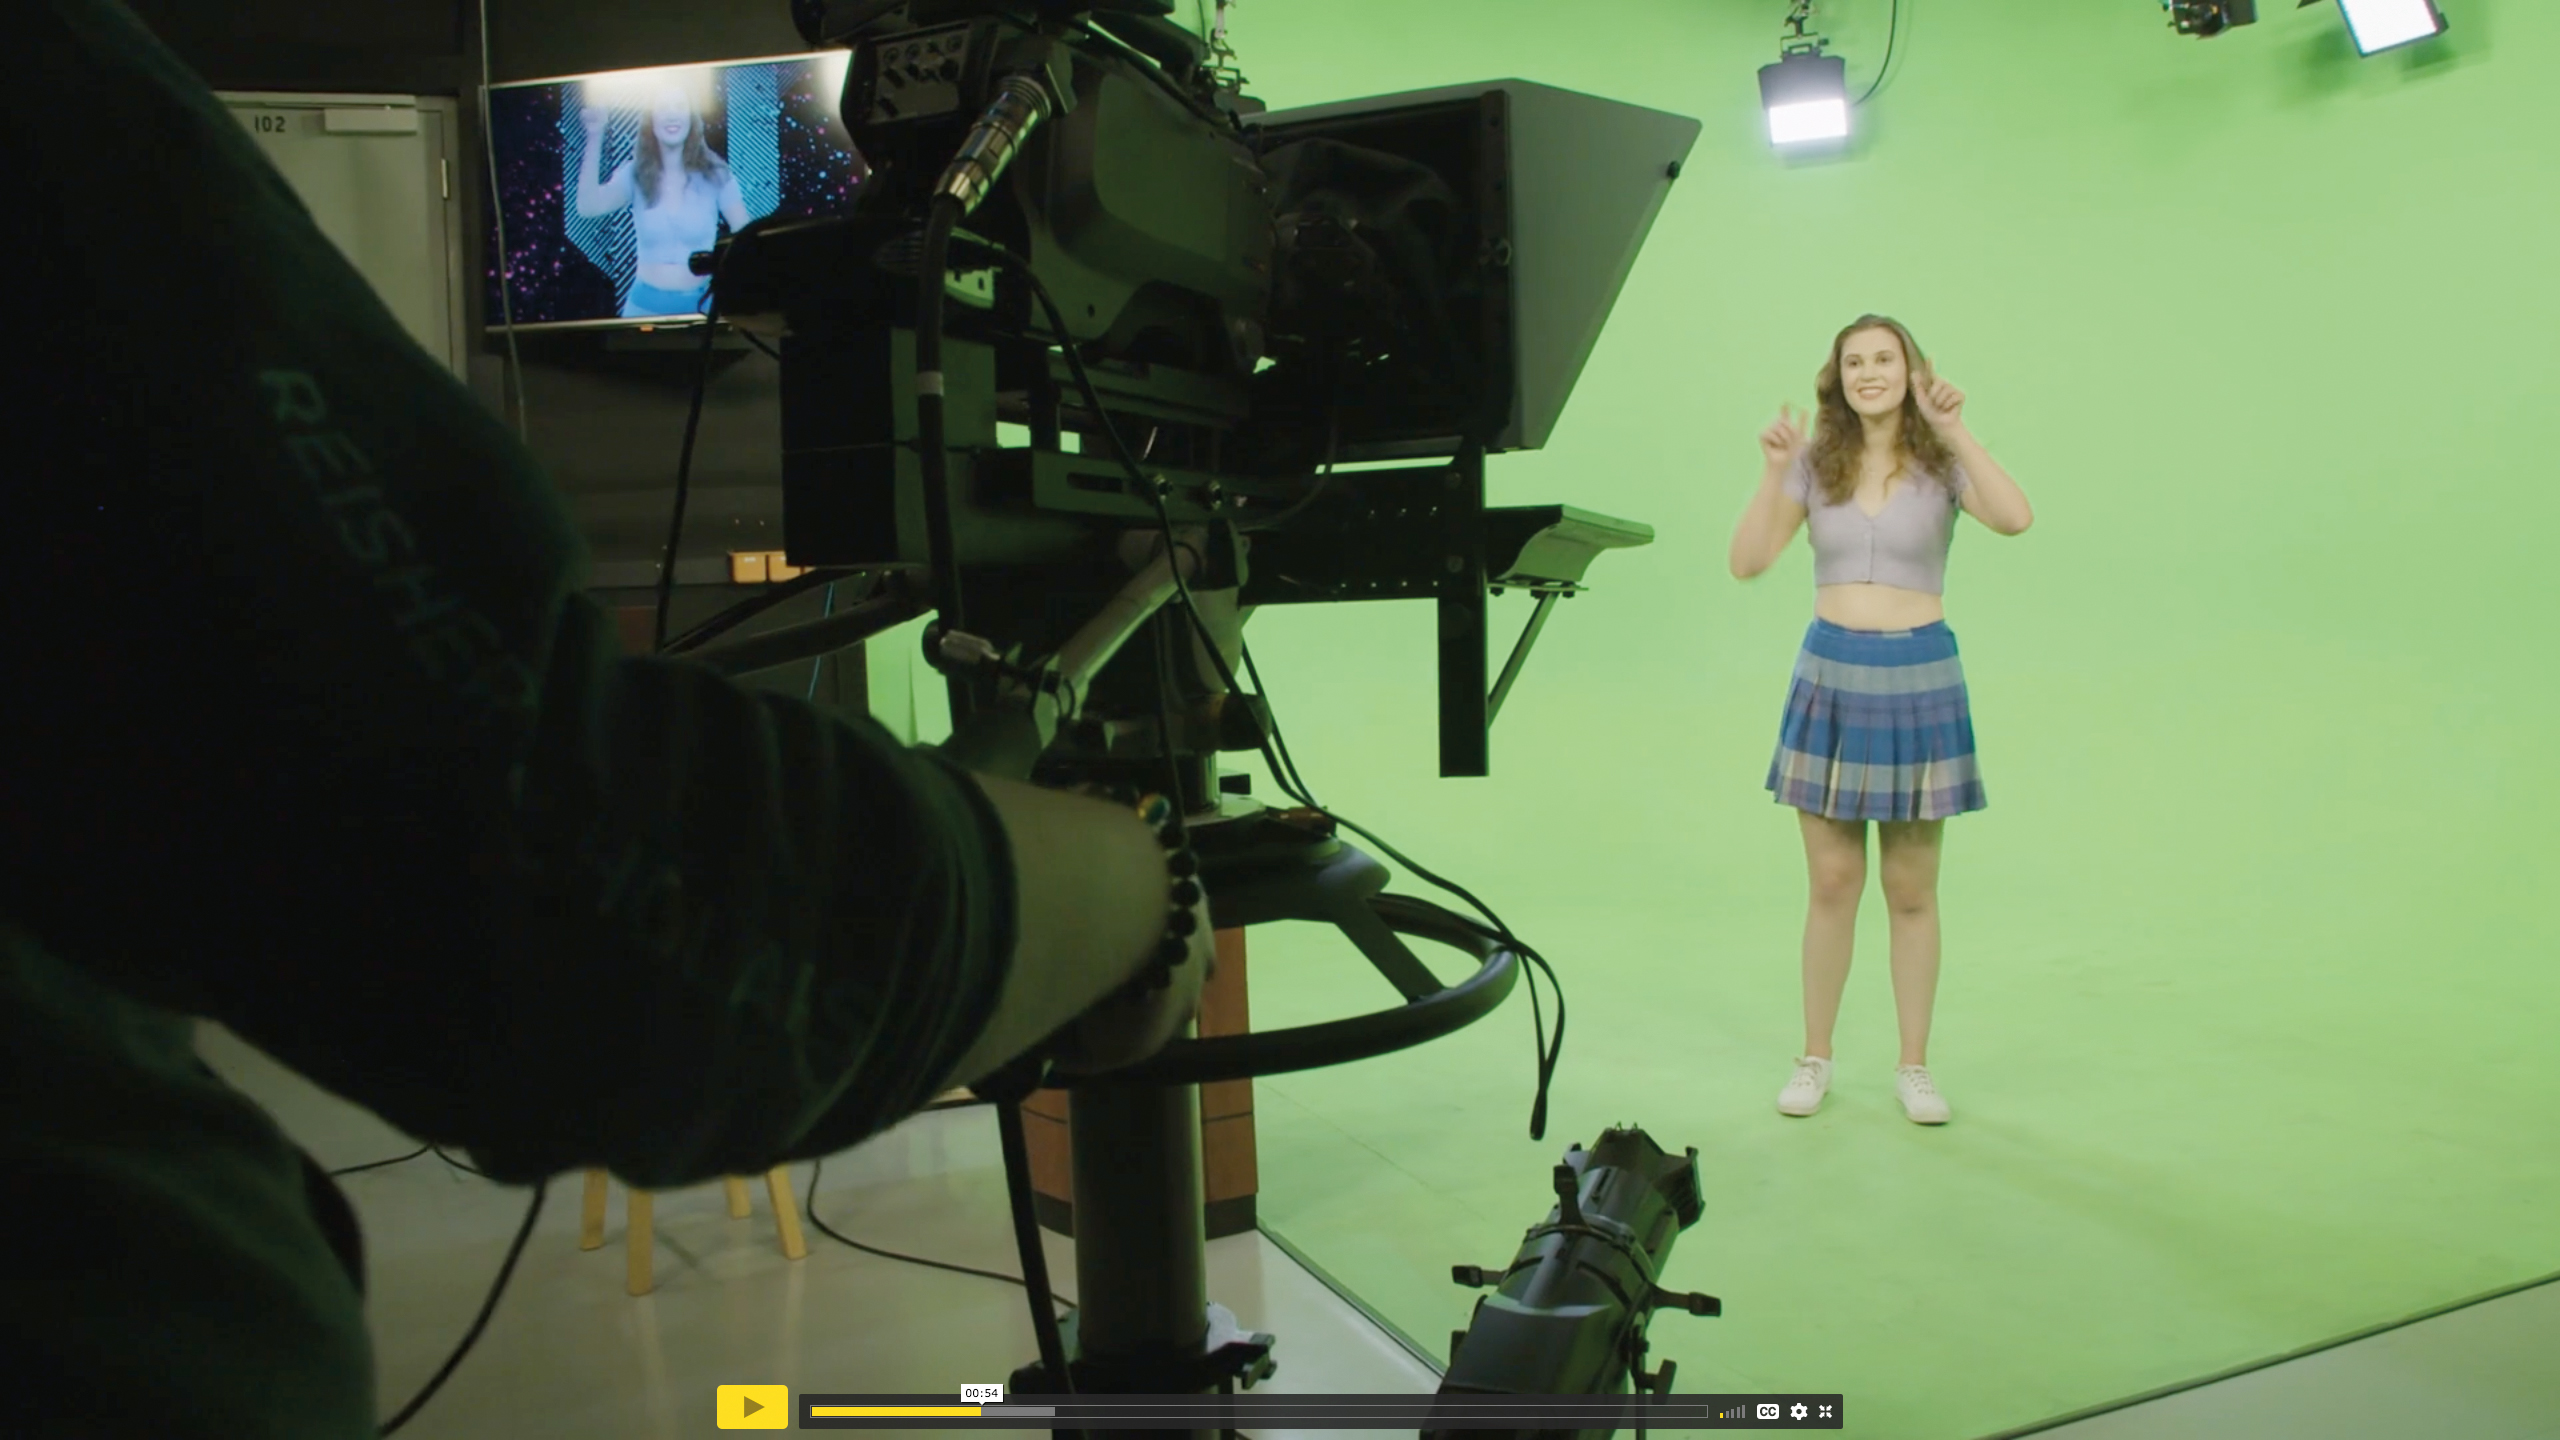 Actress preforming in front of a green screen and camera